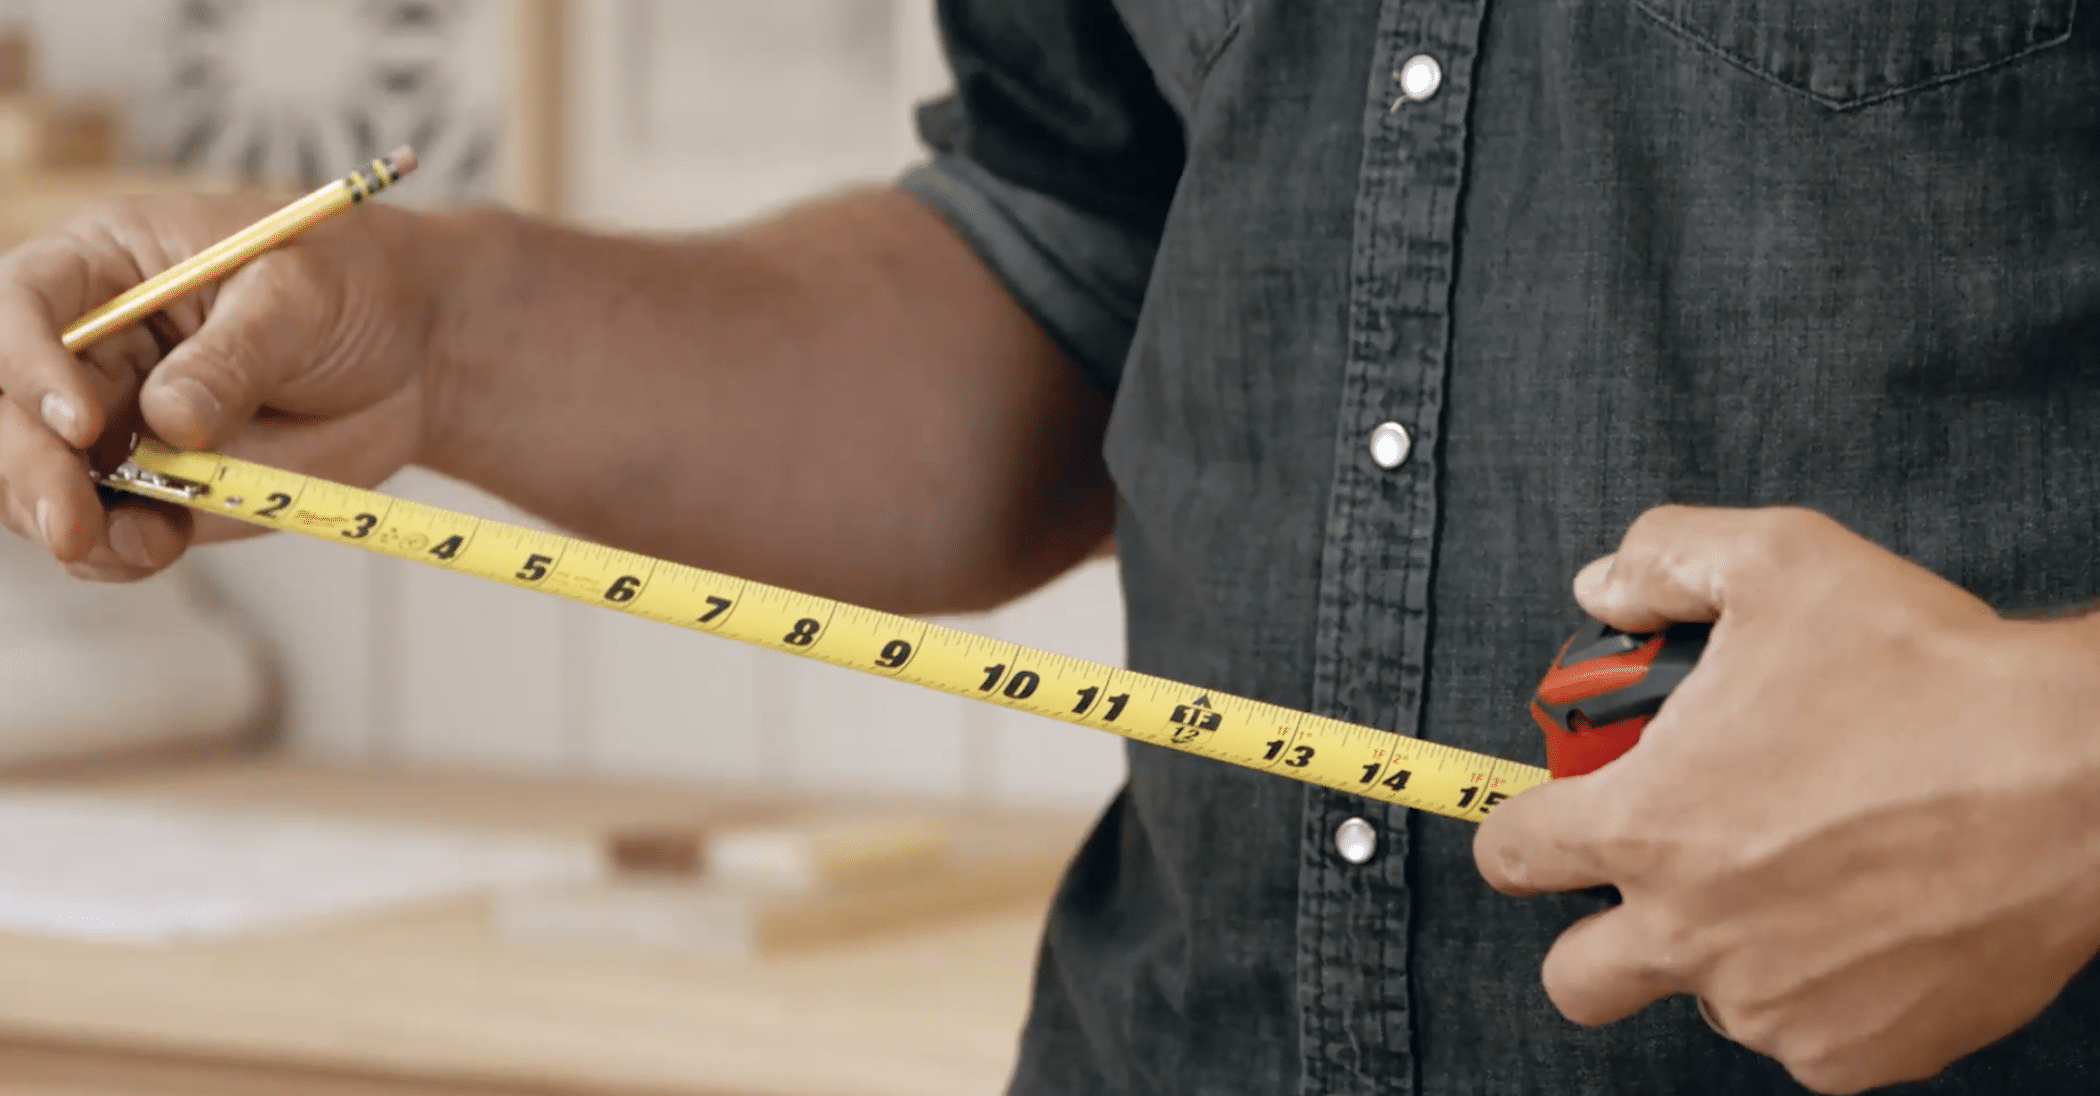 A close-up of a person's hands using a tape measure and pencil on a woodworking bench, focusing on detailed measurement for fitted bedrooms.